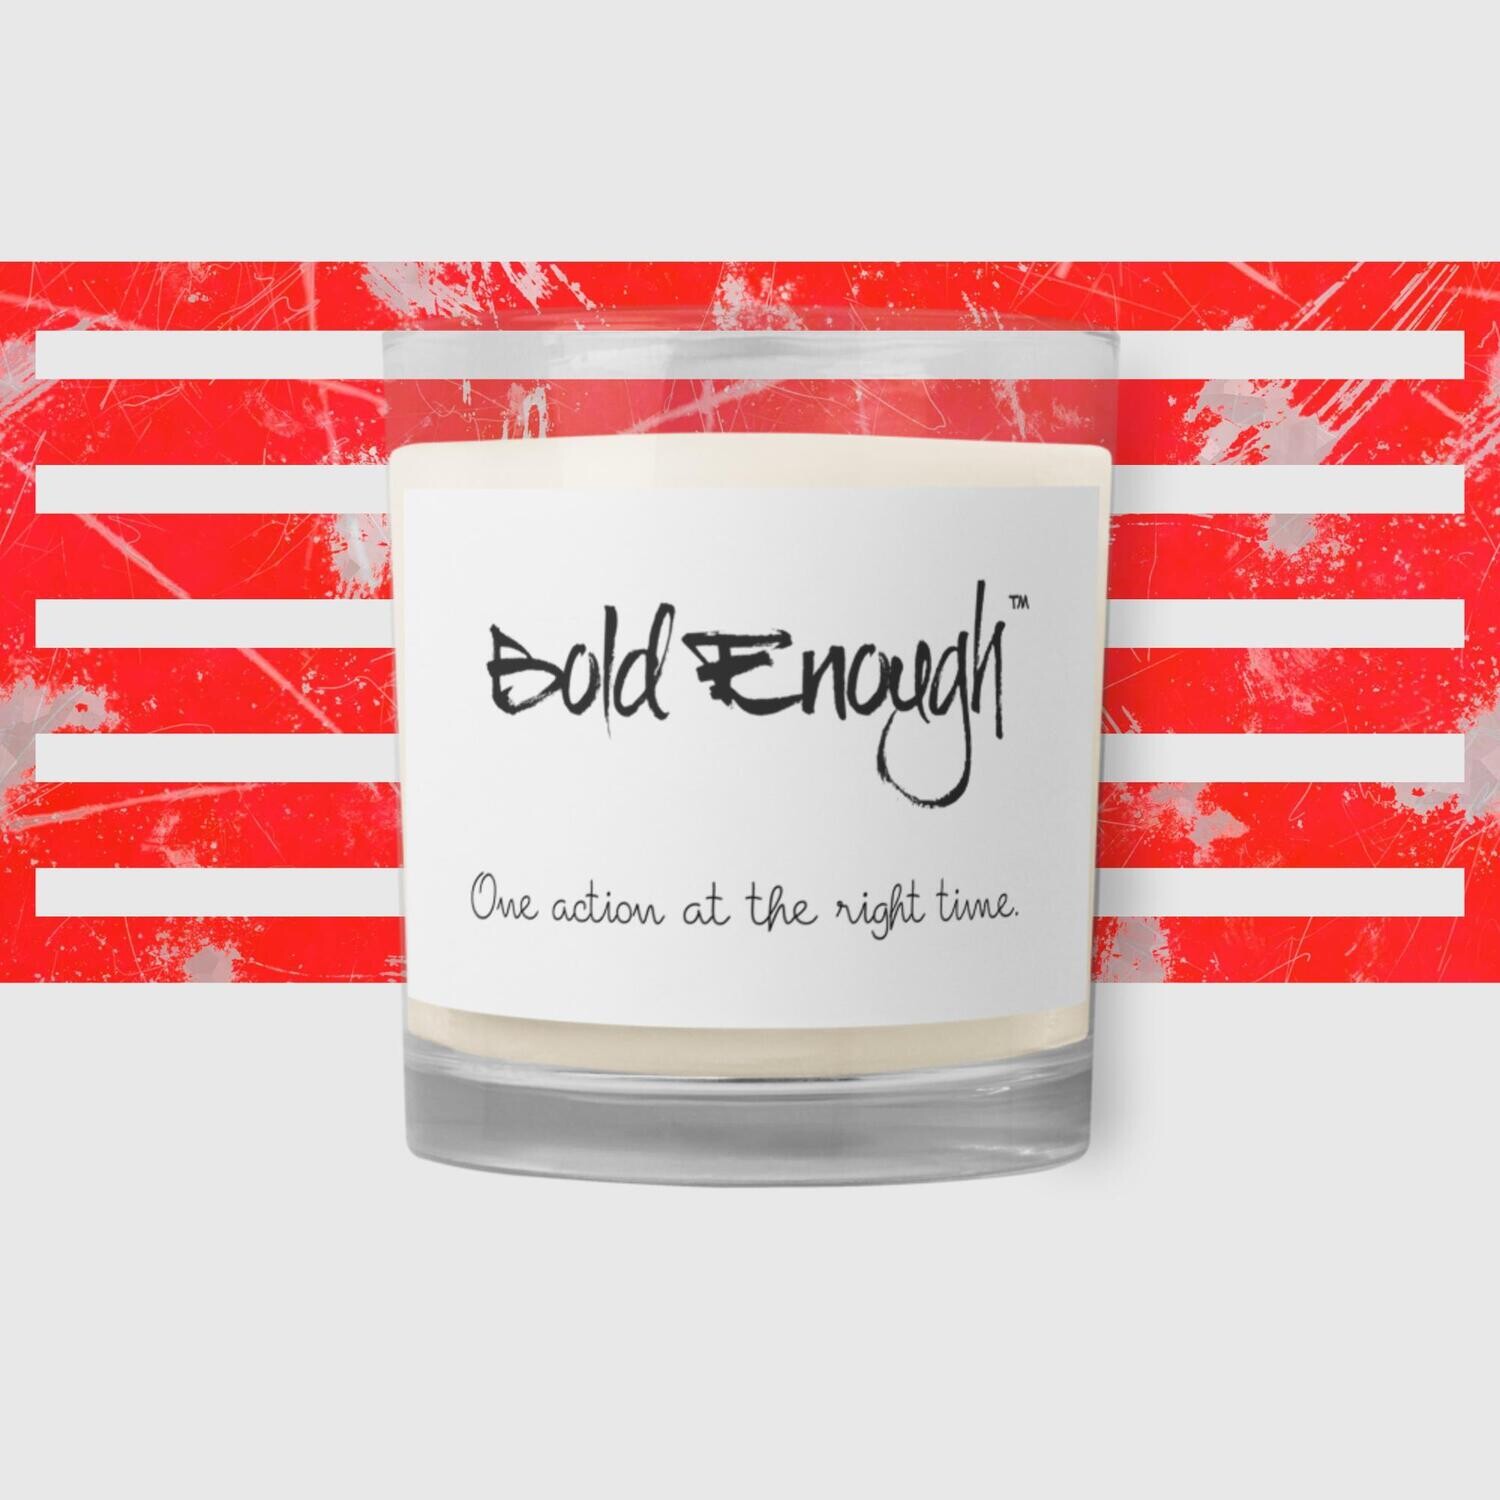 "Bold Enough" Branded Glass Jar Soy Wax Candle